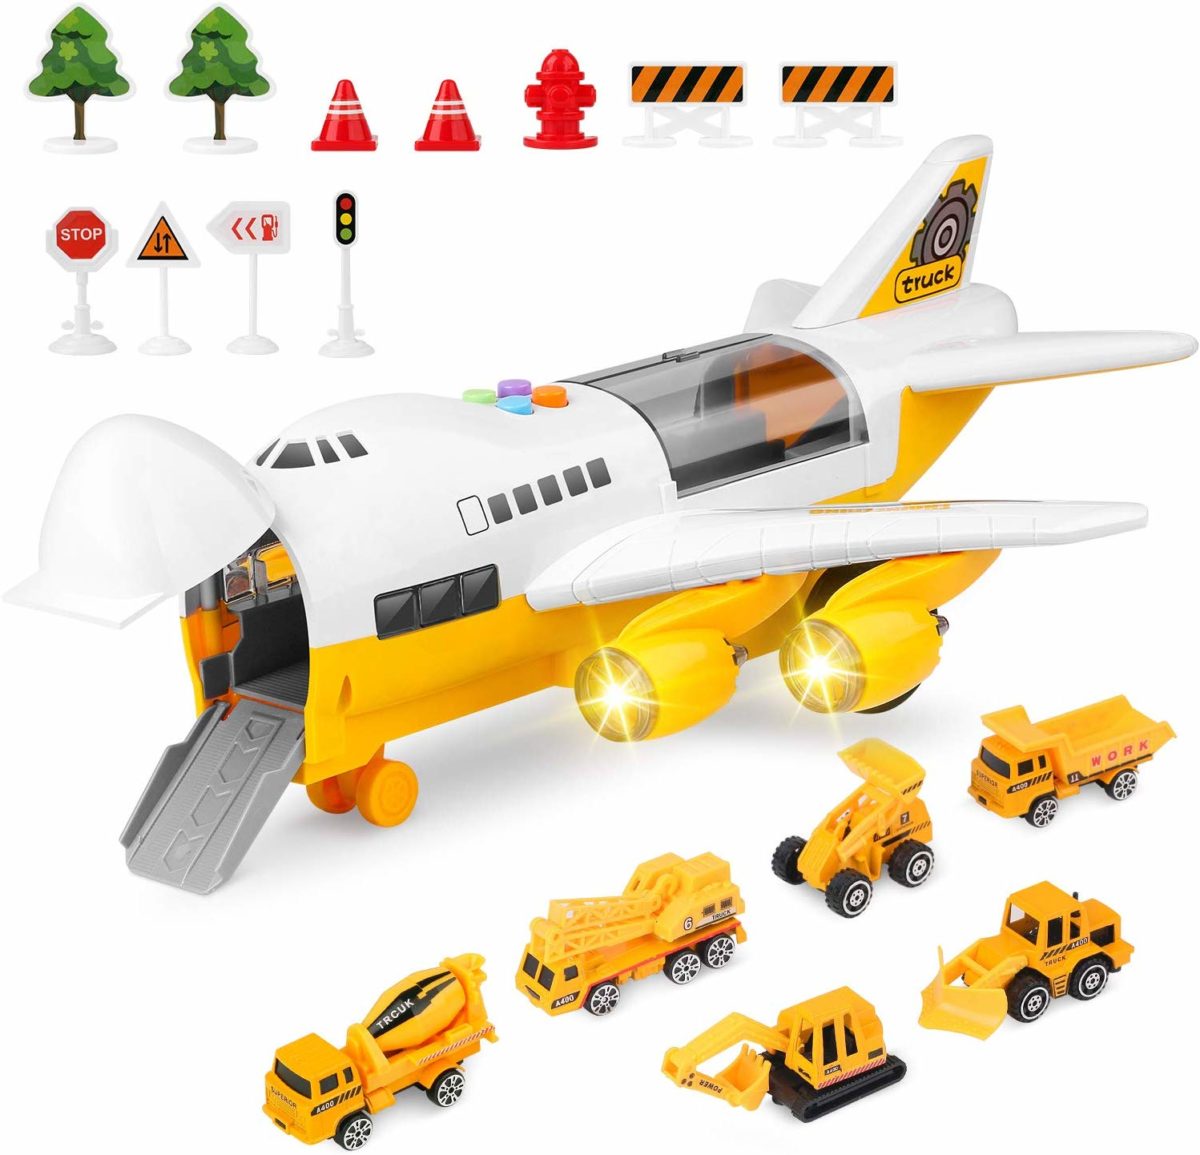 BAZOVE Construction Trucks Car Toys Set with Inertia Wheel Transport Cargo Airplane - Top Toys and Gifts for Six Year Old Boys 1